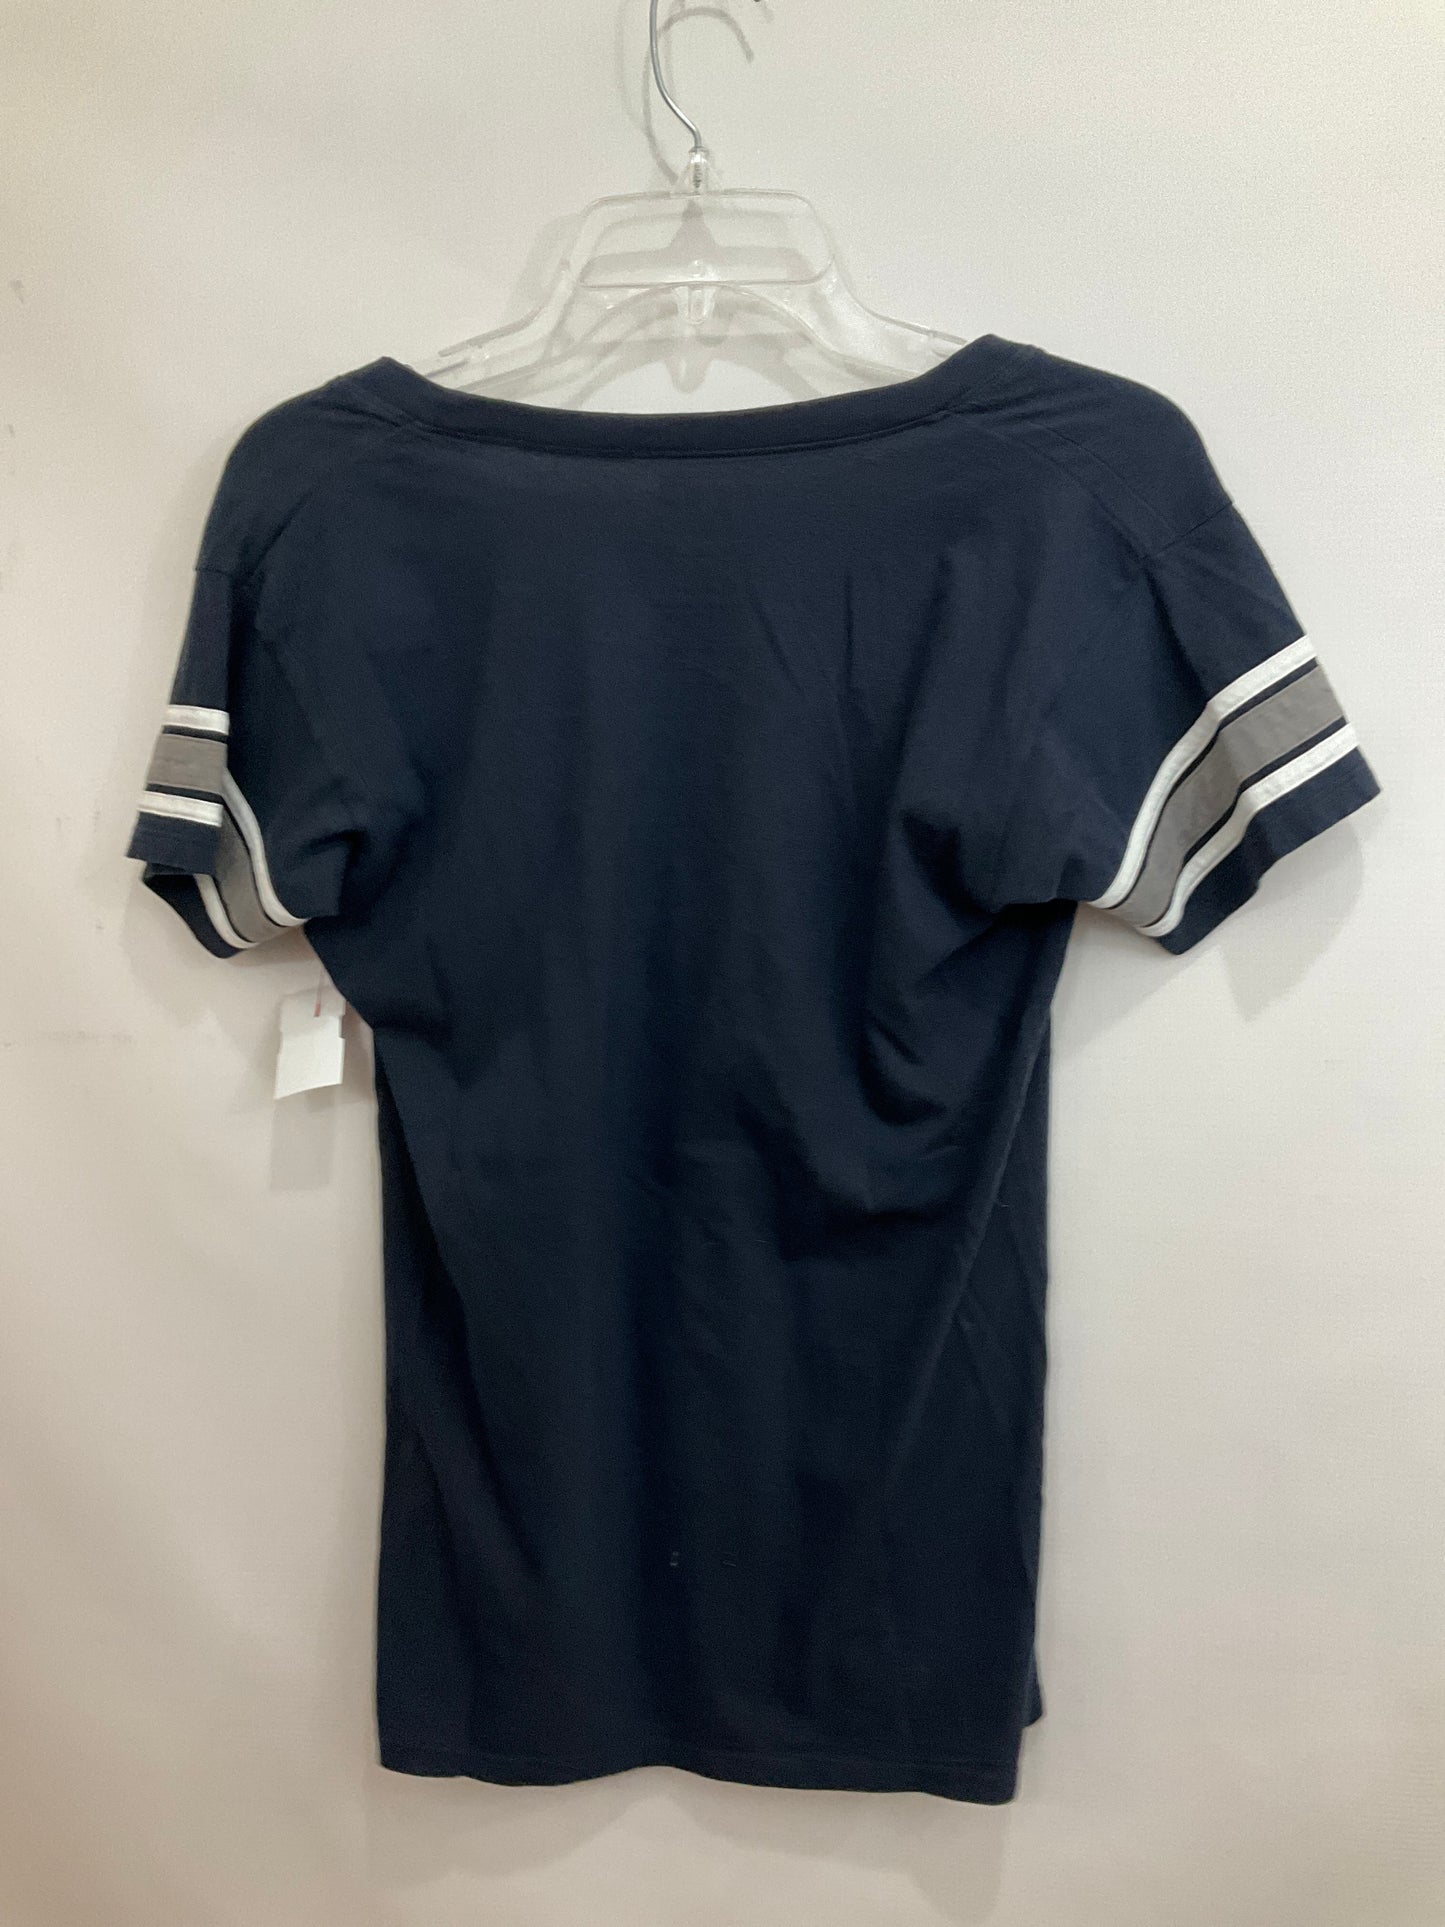 Athletic Top Short Sleeve By Clothes Mentor  Size: L